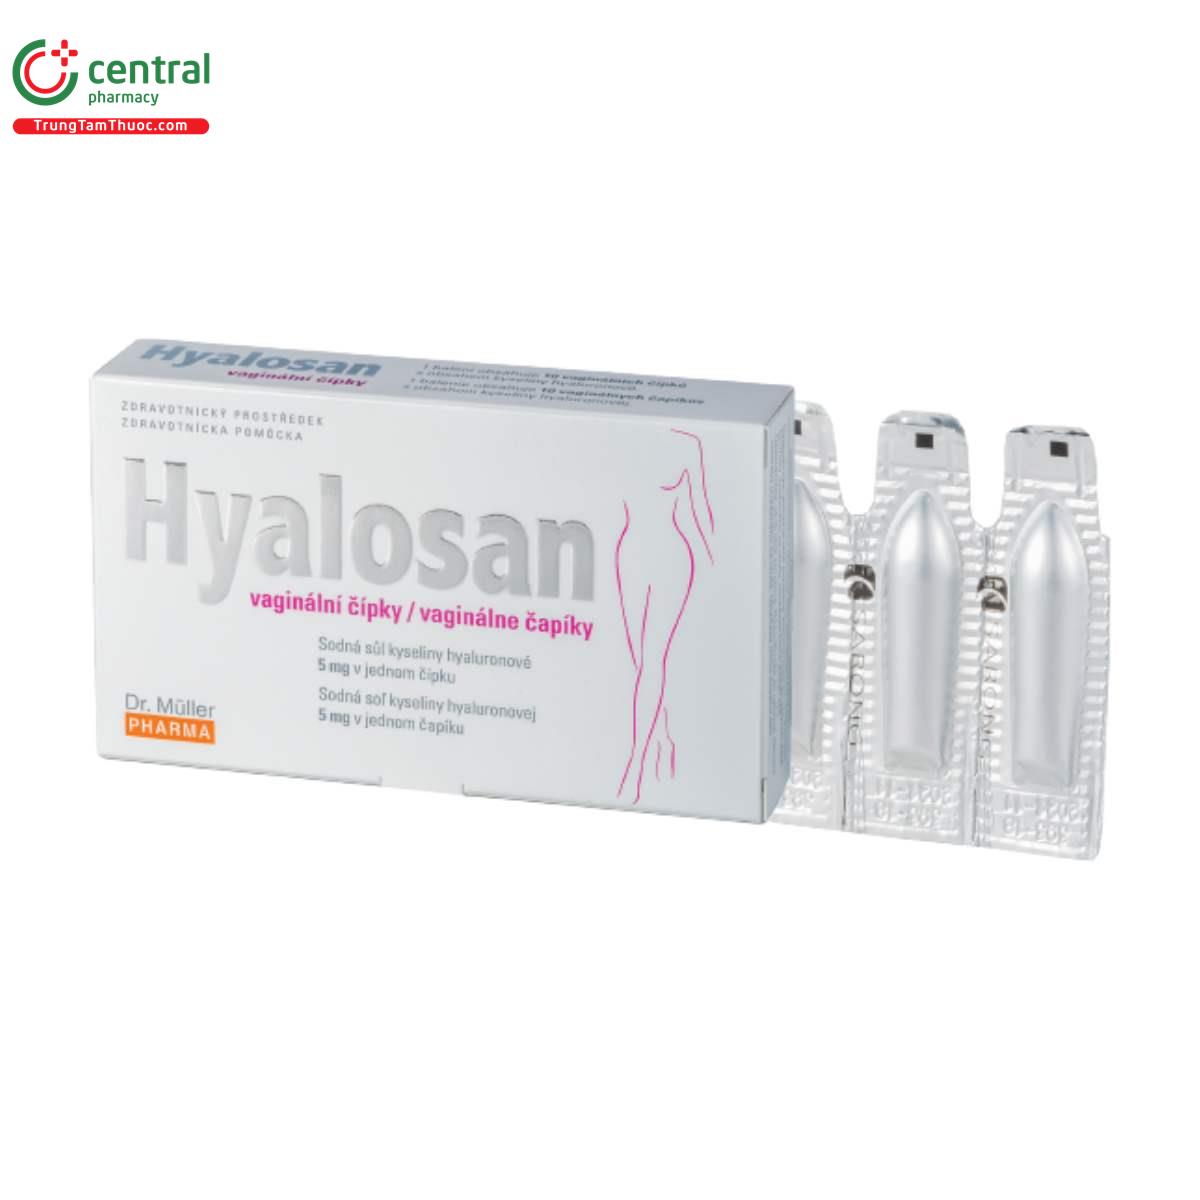 hyalosan vaginal supporities 2 G2754